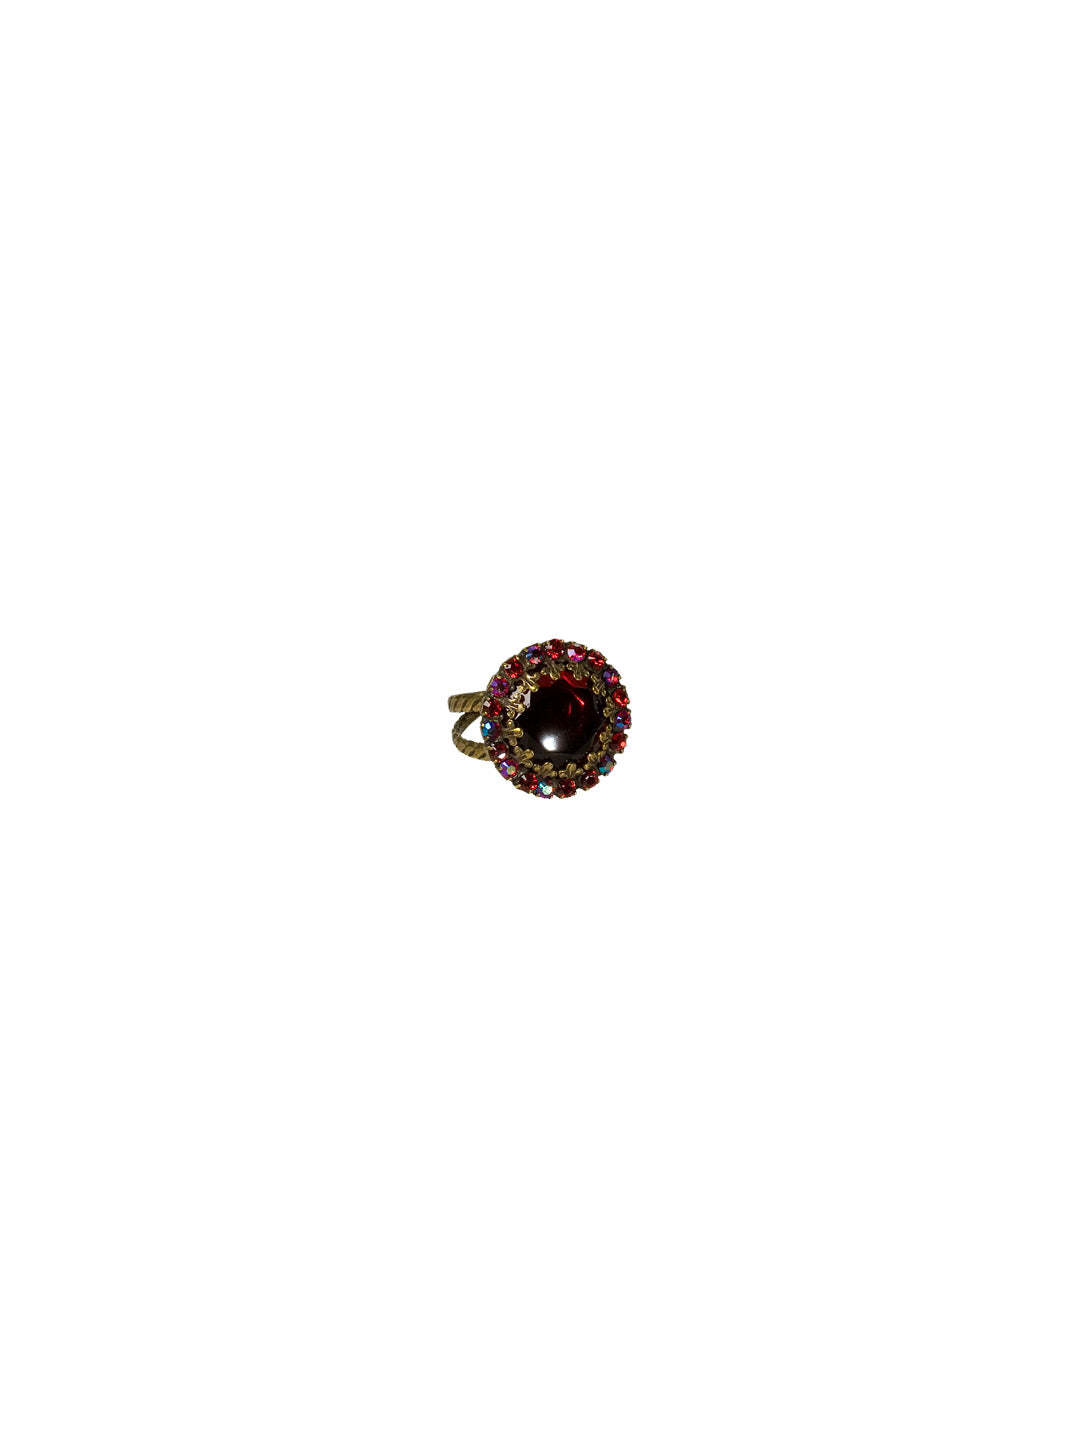 Circular Cocktail Ring with Crystal Edge Accents - RBT75AGCB - Two rows of petite accent crystals highlight a brilliant round-cut crystal in this easy to wear style. From Sorrelli's Cranberry collection in our Antique Gold-tone finish.